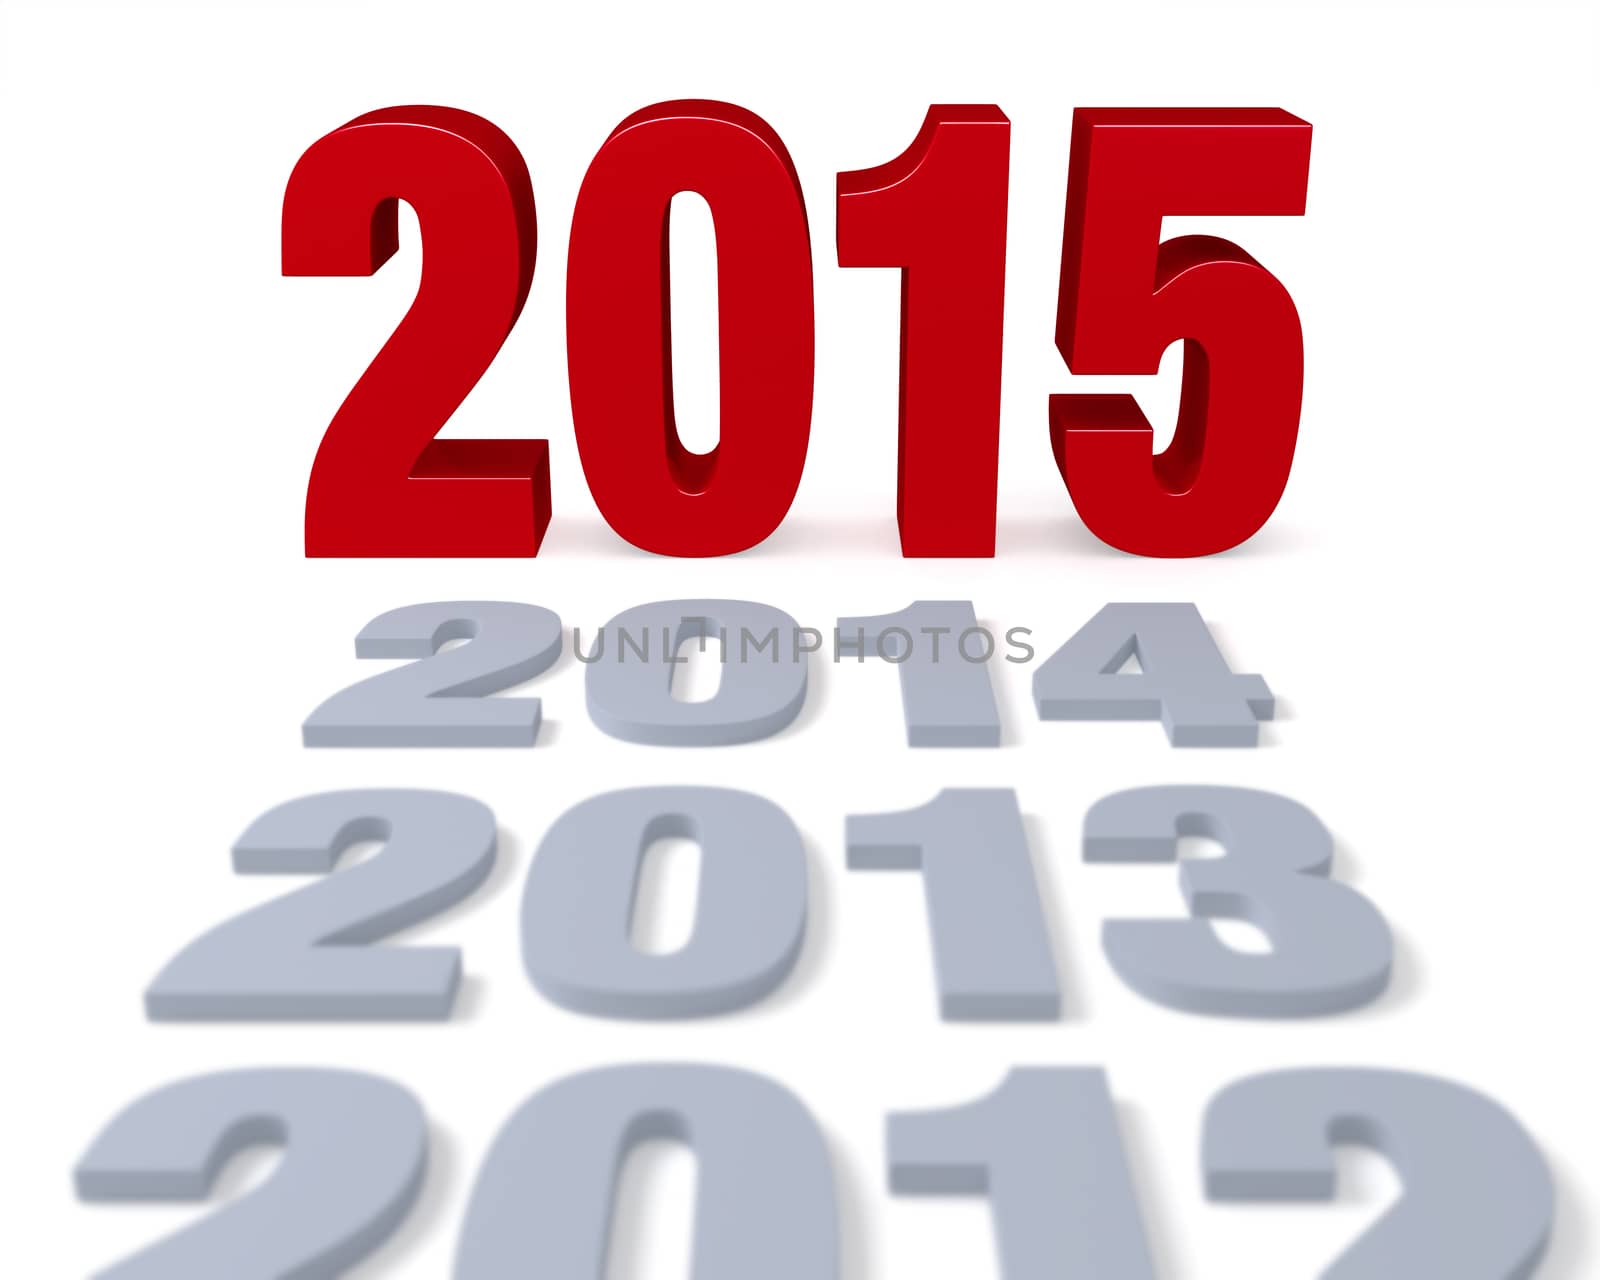 Preceding years in gray lead to a large, shiny red "2015!"  Focus is on 2015. Isolated on white. 